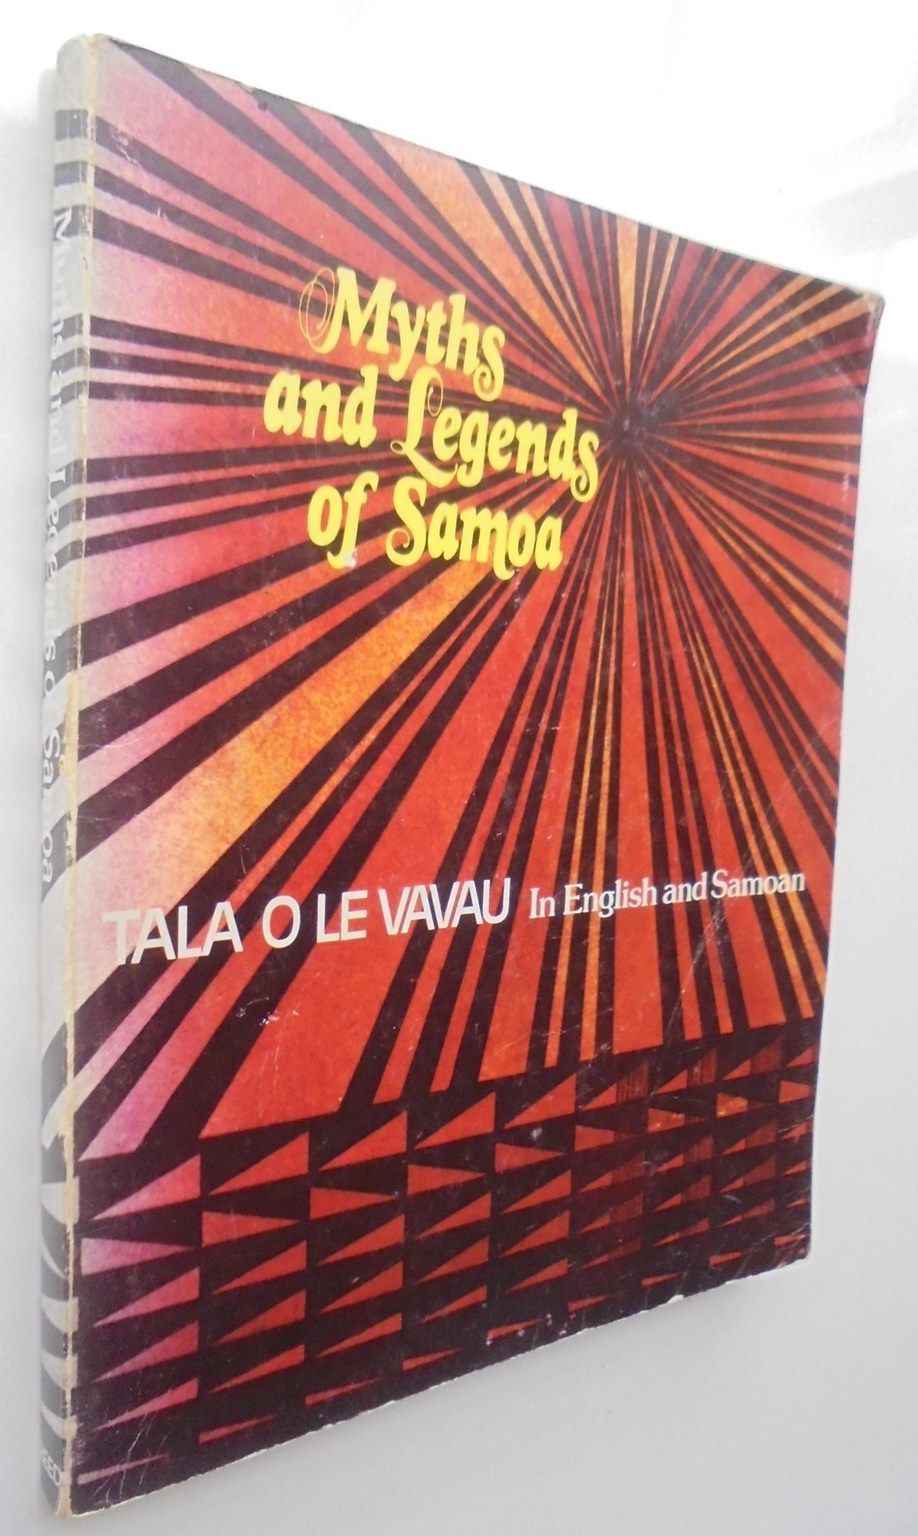 Myths and Legends of Samoa / Tala o le Vavau. In English and Samoan by C. Stuebel.